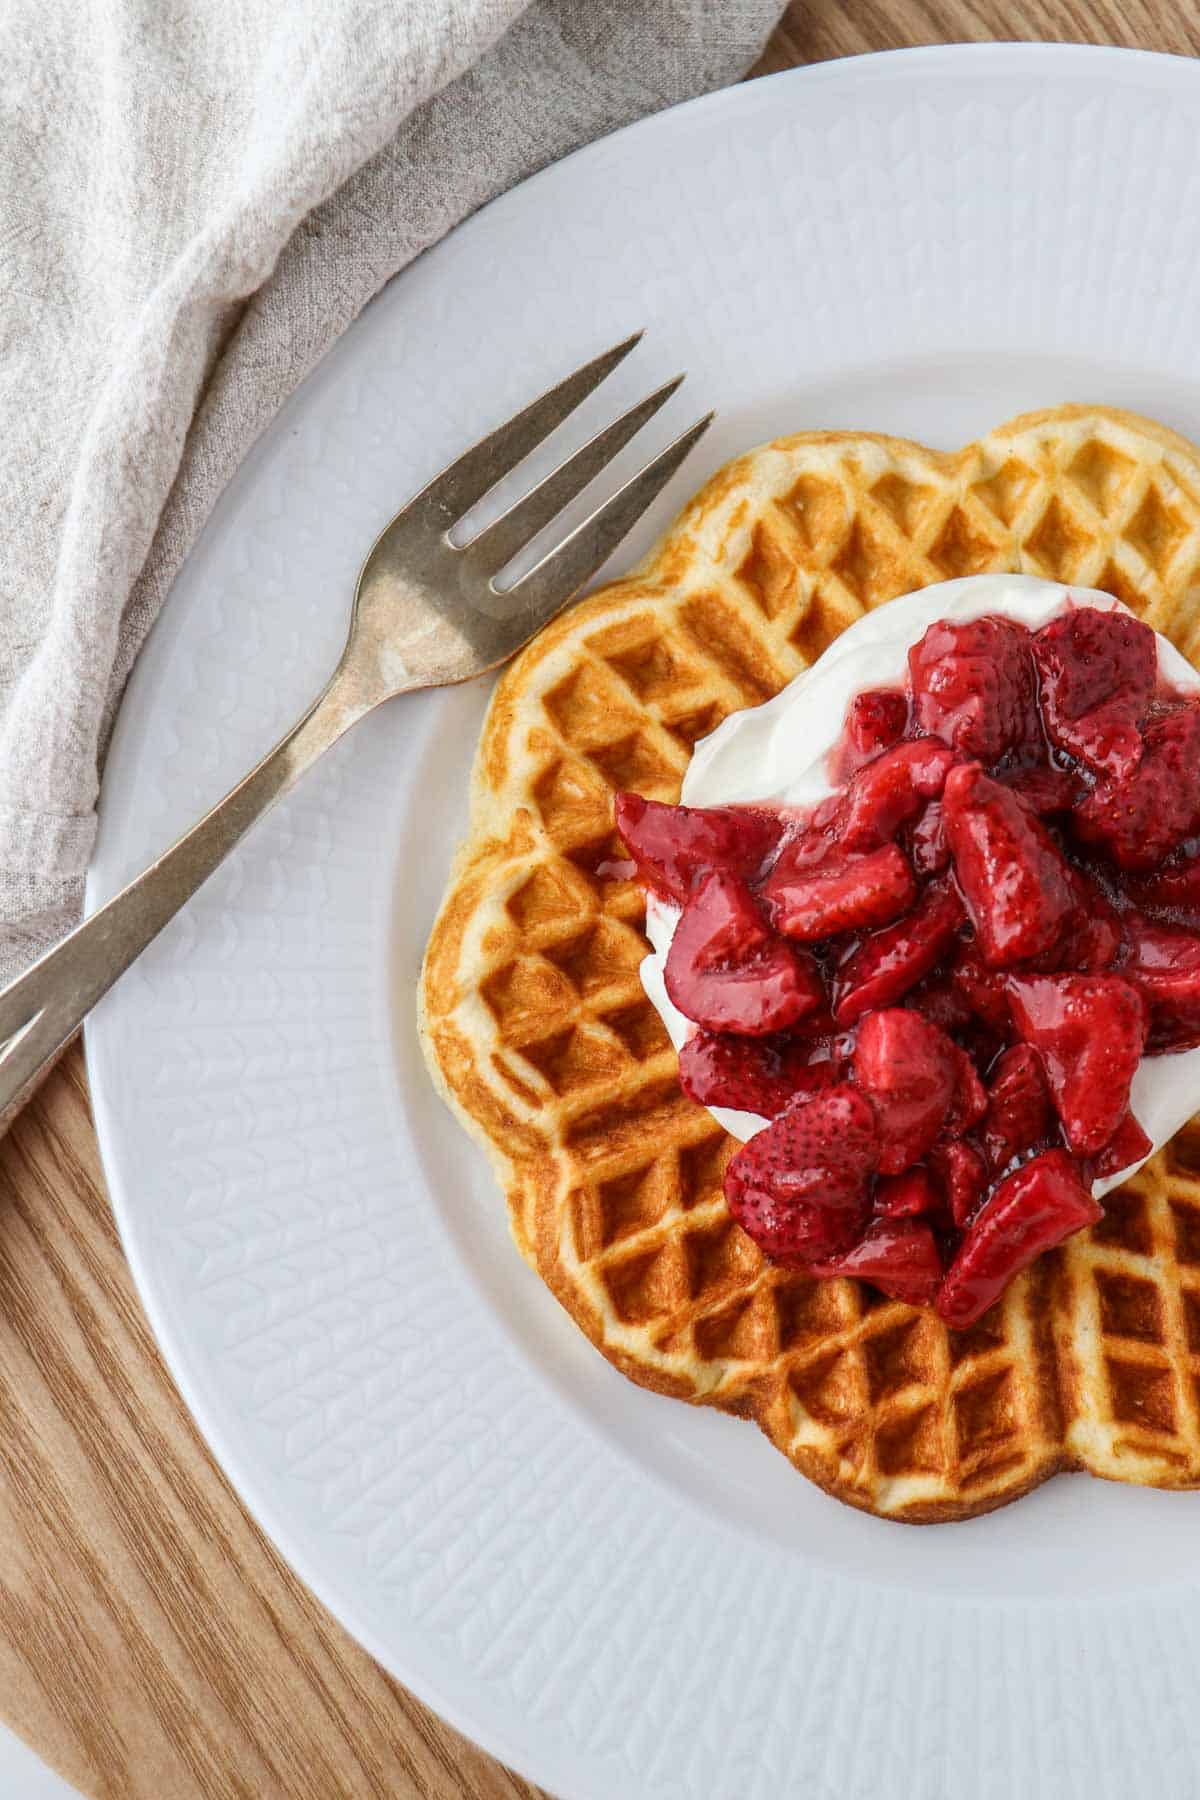 Heart shaped waffle on a plate topped with whipped cream and roasted strawberries.